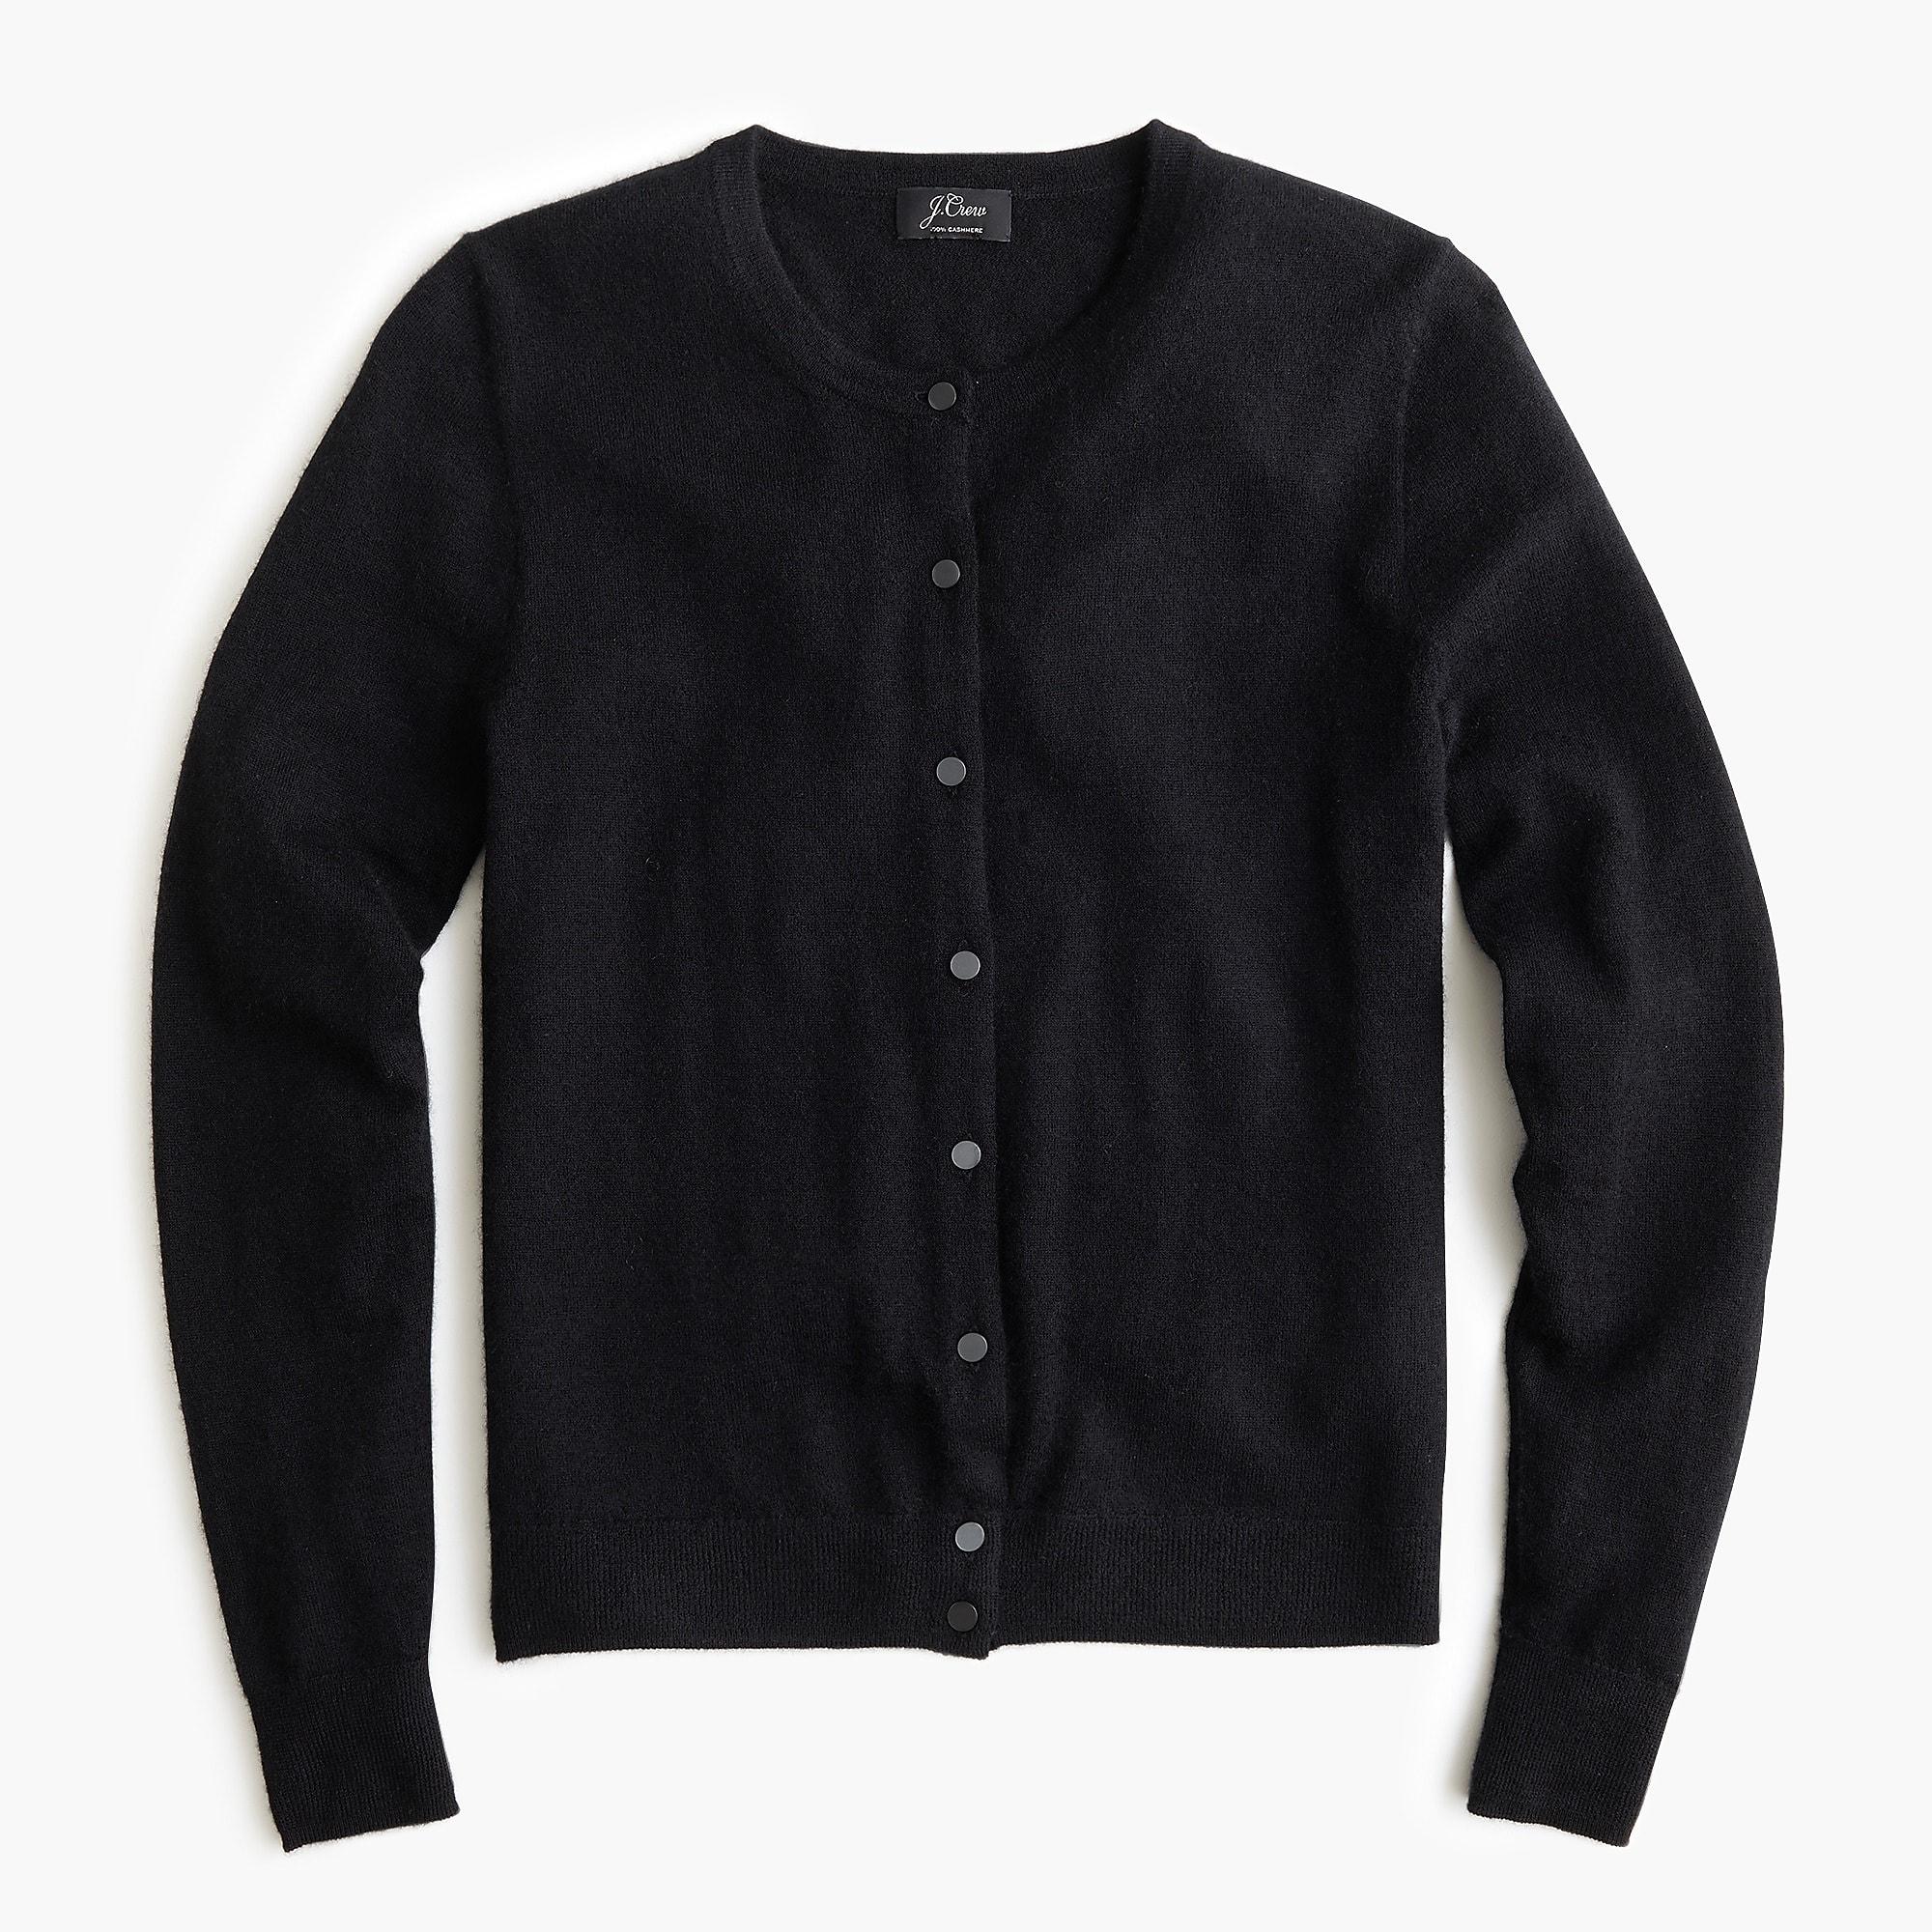 J.Crew Featherweight Cashmere Cardigan Sweater in Black - Lyst